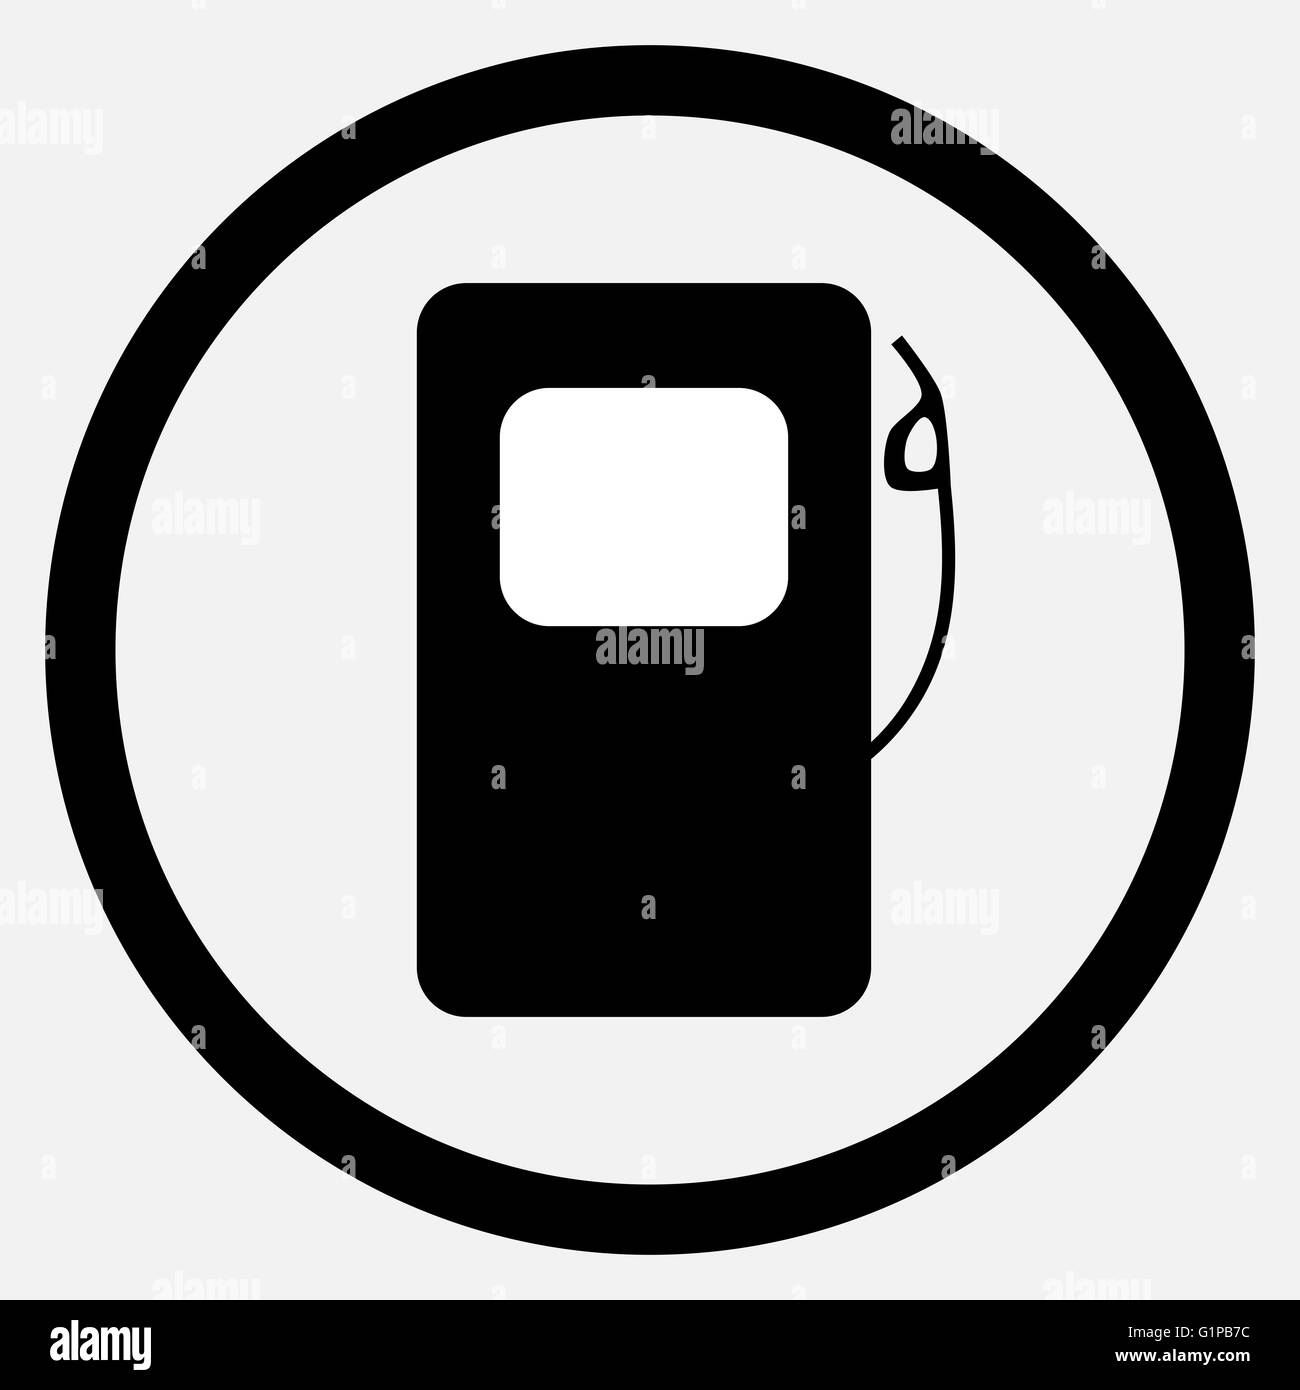 Fuel station icon black white. Fuel and gas station, fuel pump and petrol station, gasoline station and station icon fuel, pump Stock Photo